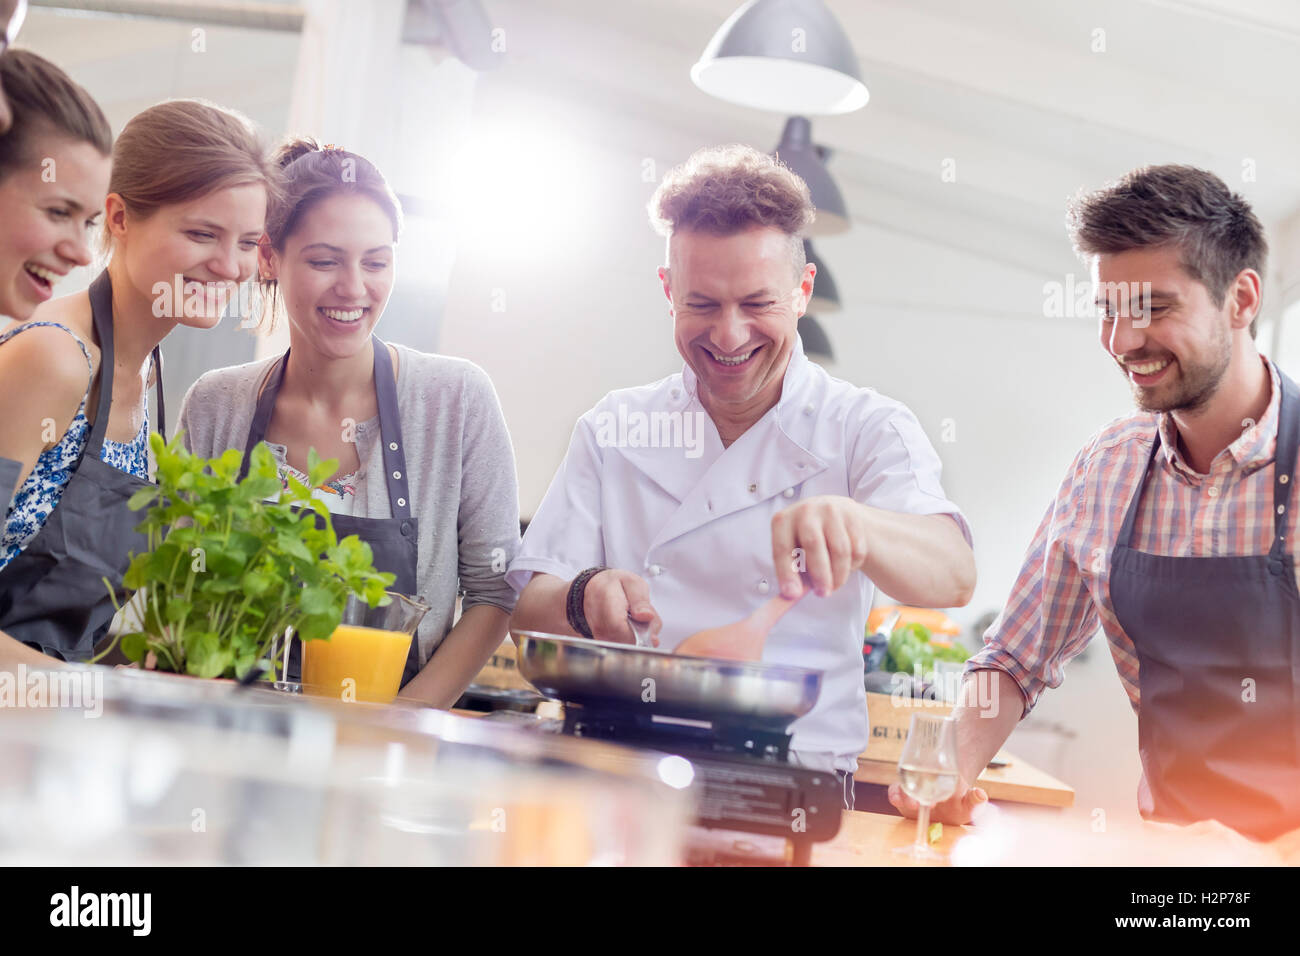 Students watching teacher in cooking class kitchen Stock Photo